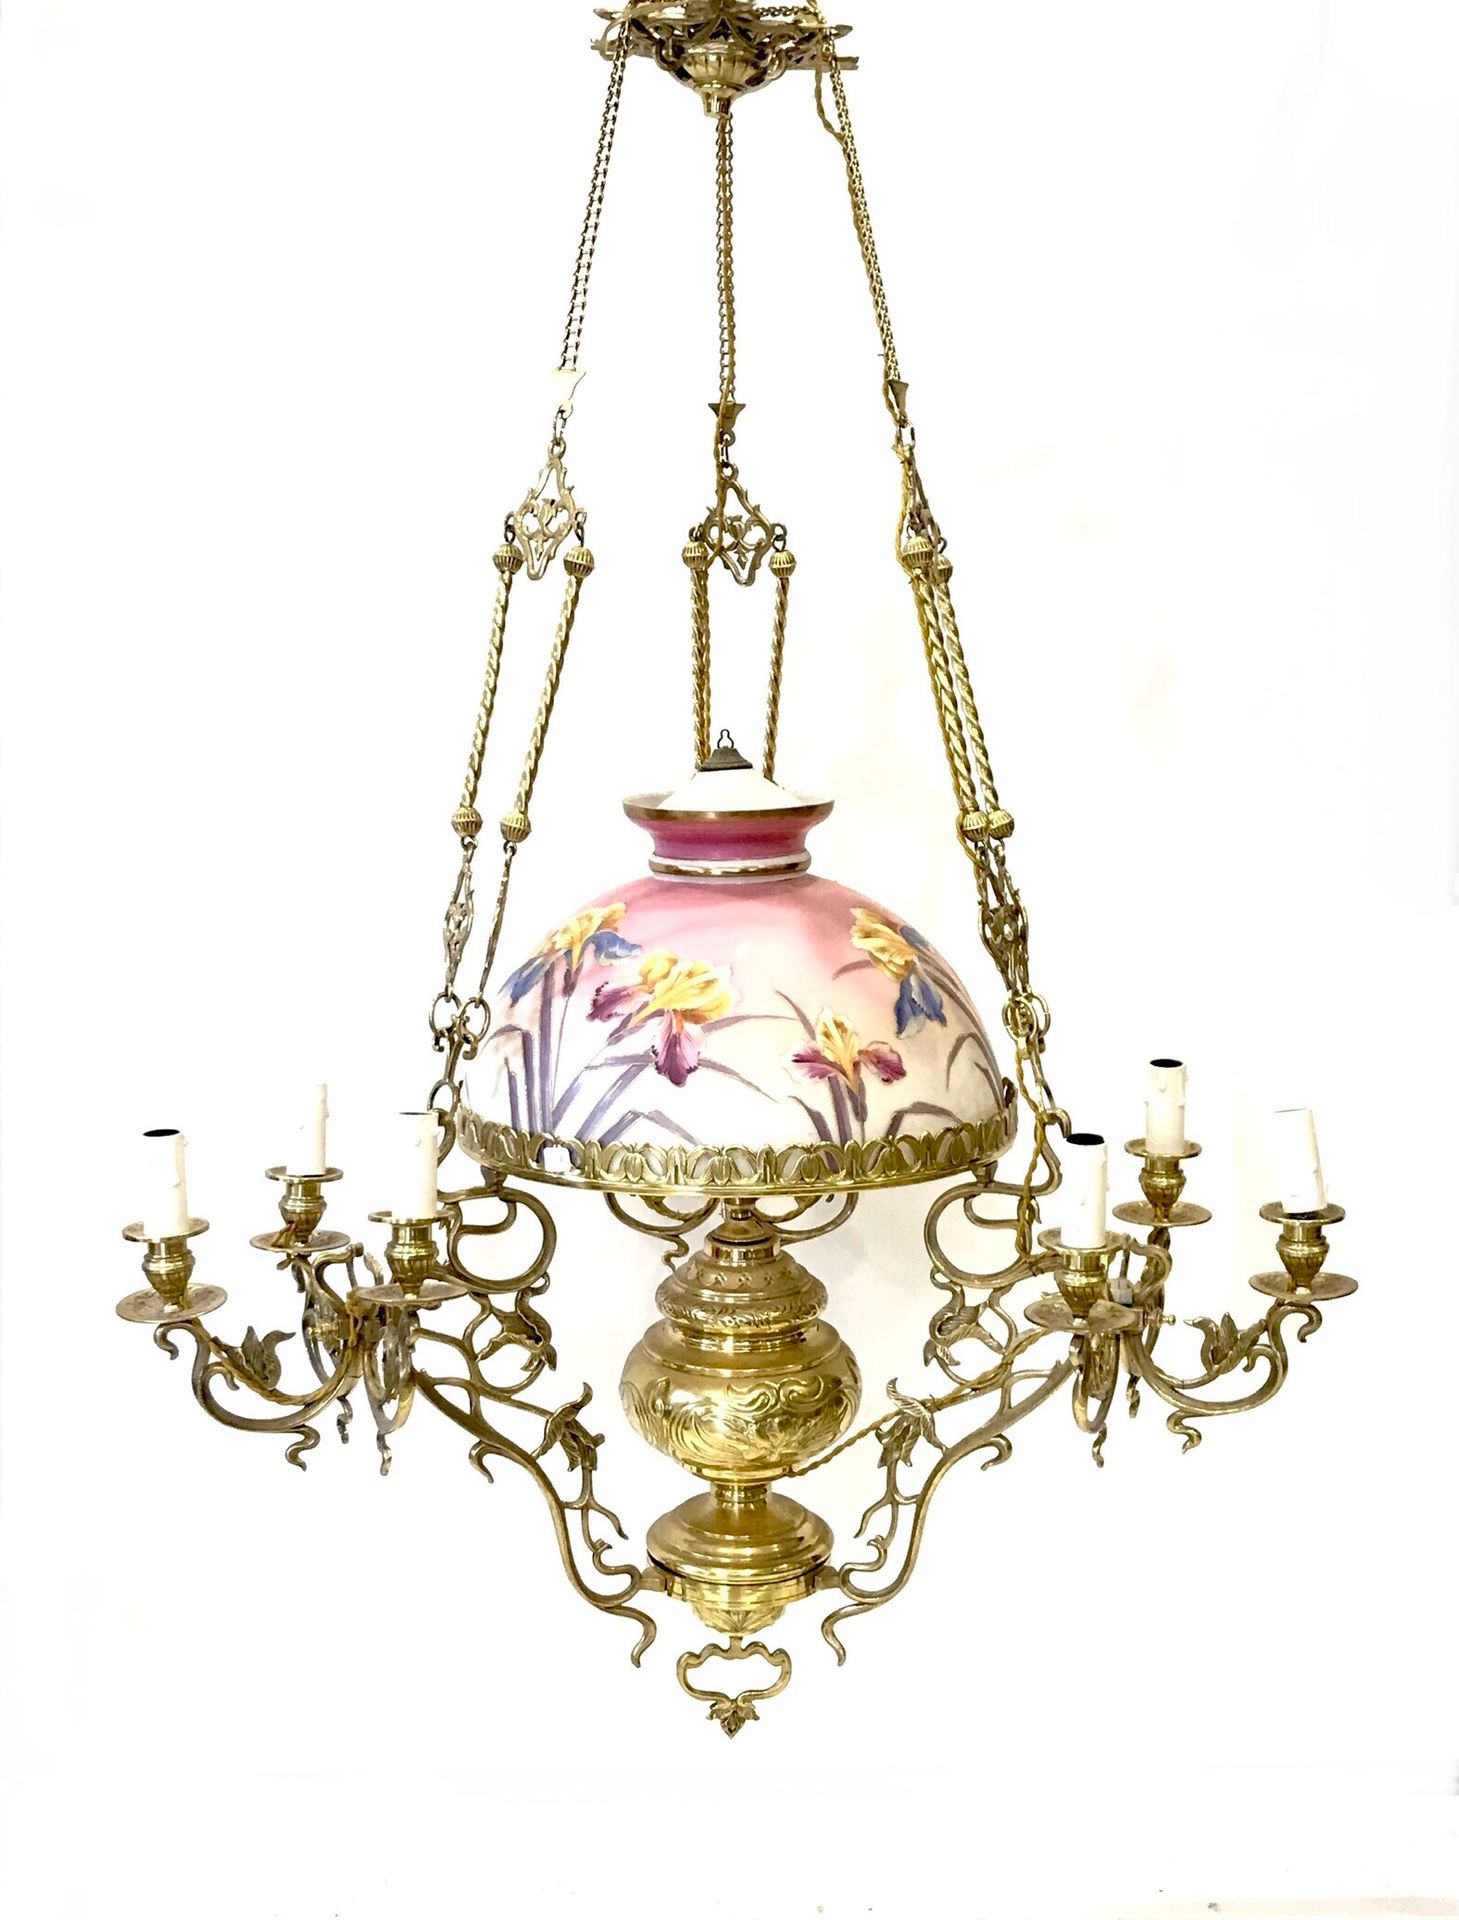 Null Rises and falls in gilded metal with 9 arms of light and dome in opaline gl&hellip;